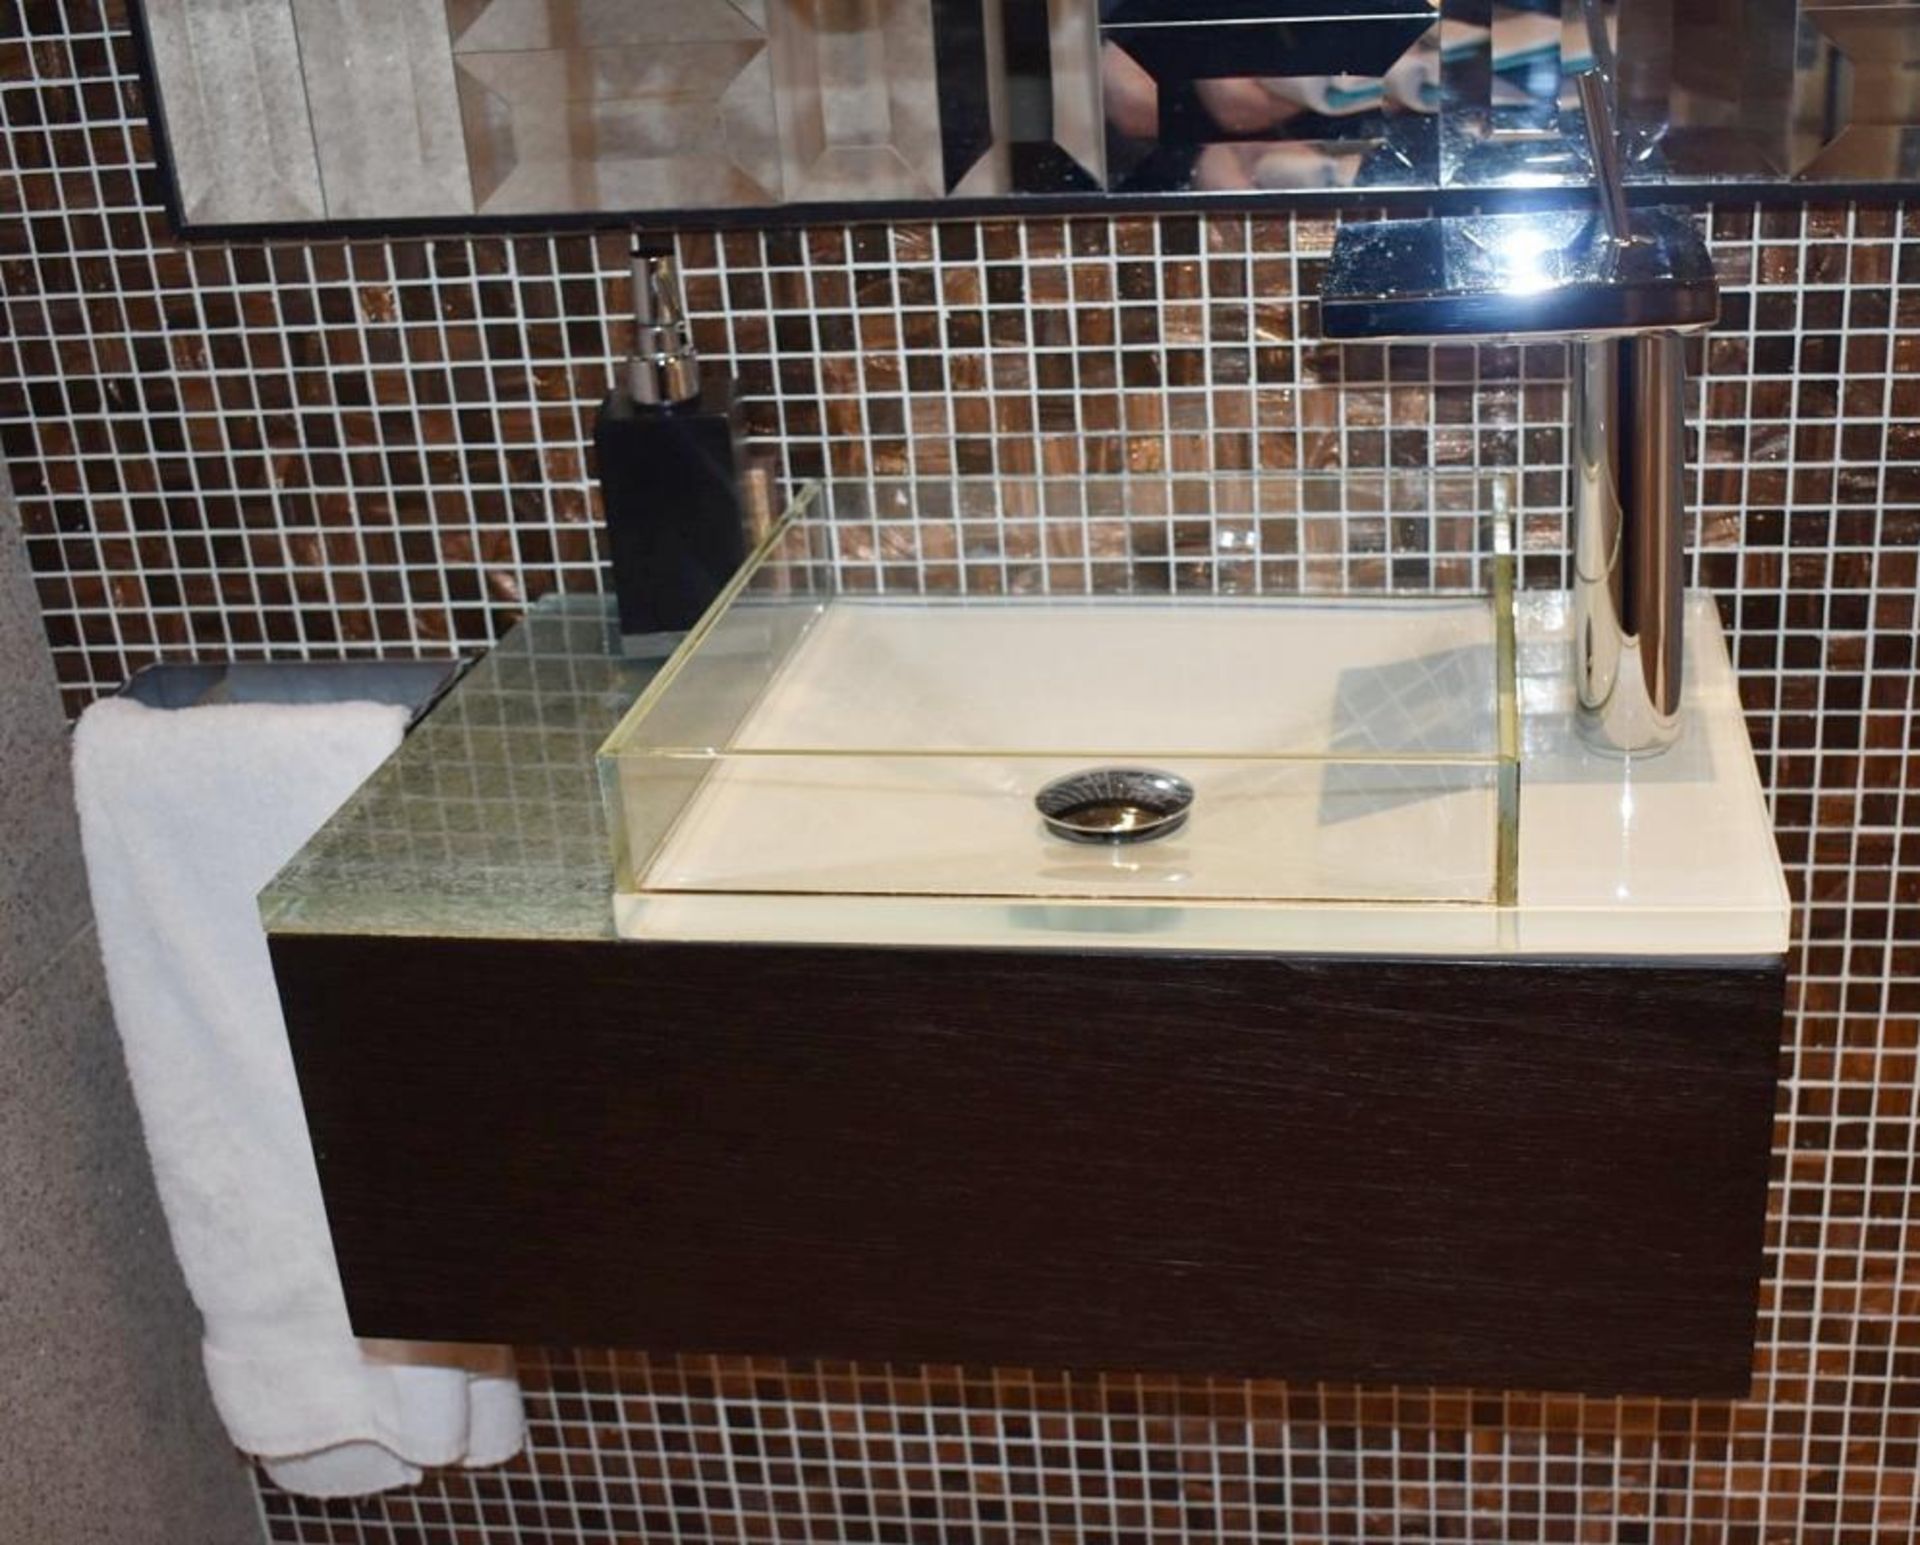 1 x Downstairs Bathroom Suite - Includes: Wall Hung Pan with Seat, Gerberit Wall Flusher, Wall Hung - Image 10 of 10